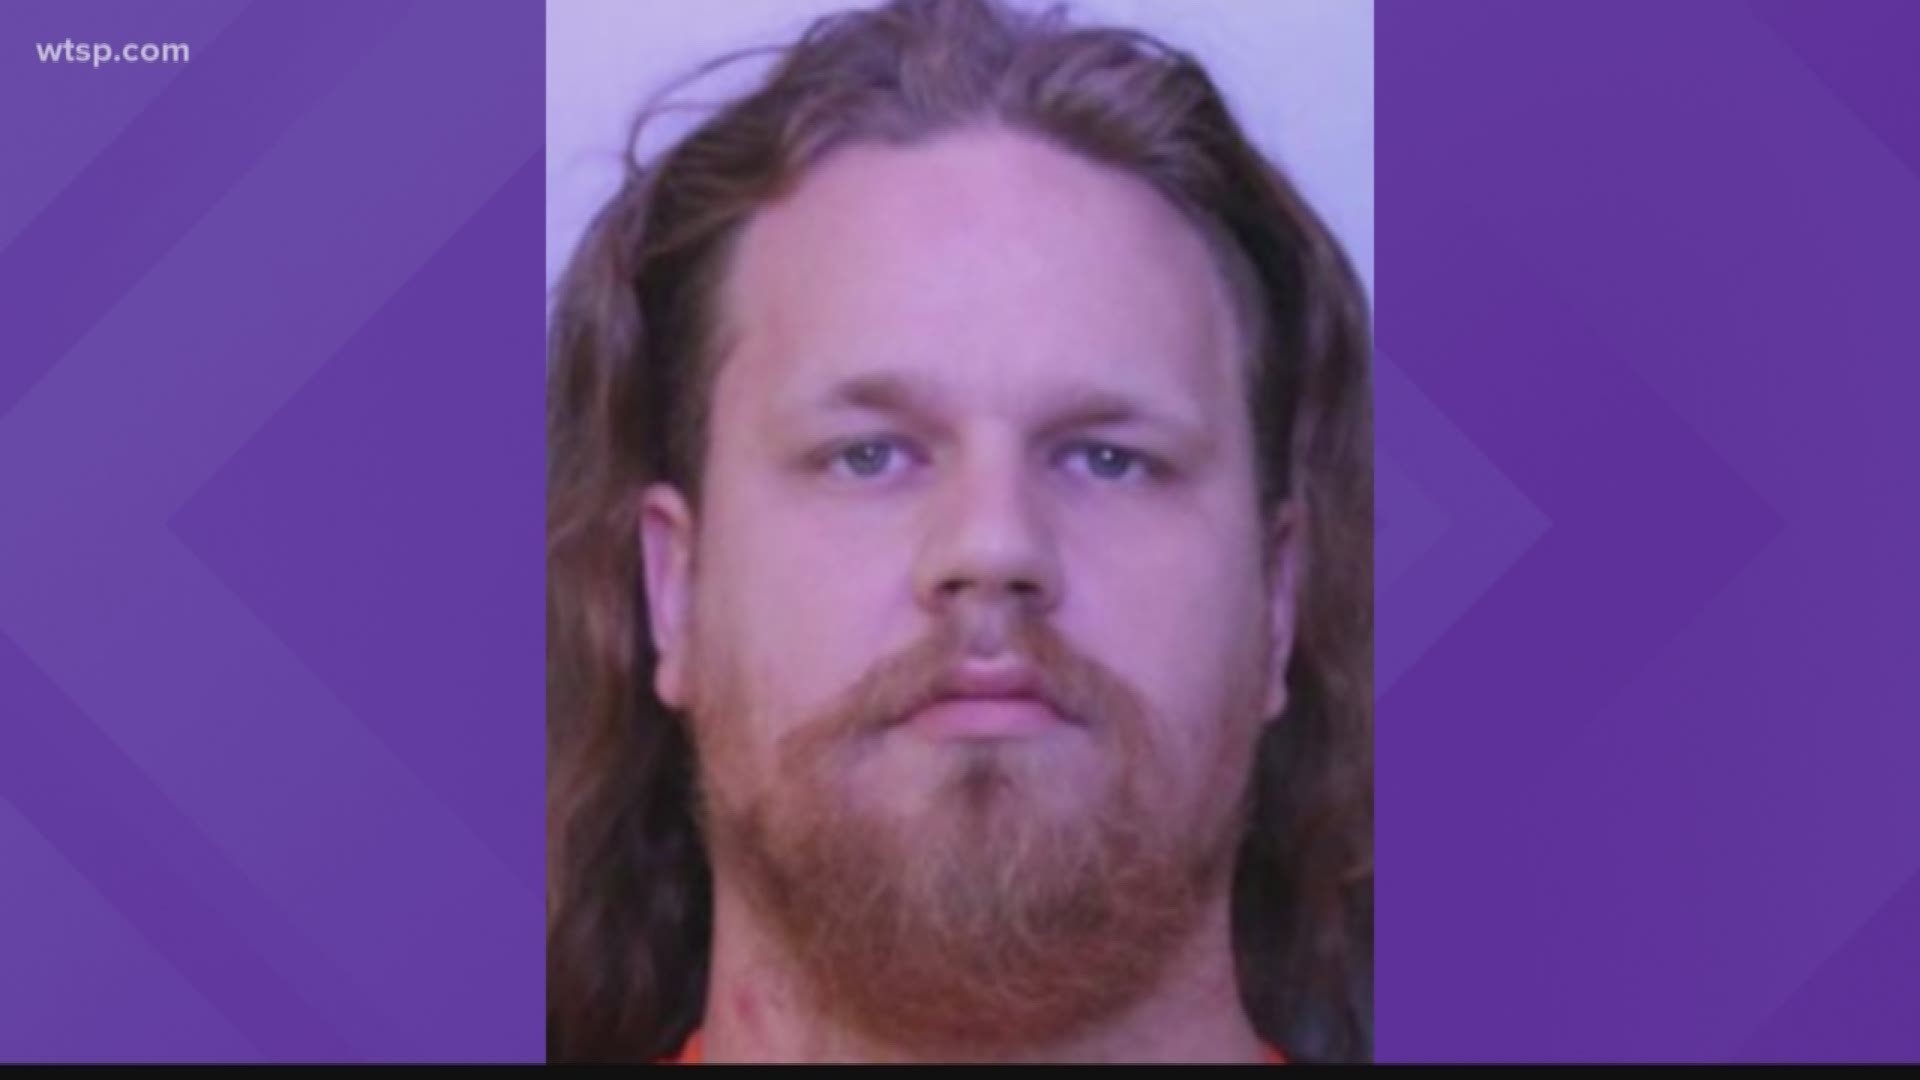 An Auburndale man is accused of sexually abusing a young child, capturing the abuse on his laptop and sending a photo to a man in Kentucky through an online role-playing game.

The Polk County Sheriff's Office said Dylan Driggers, 26, got naked and sexually abused a child who authorities said appeared to be 4 years old.

A Kentucky man contacted law enforcement Tuesday to say he had received an unsolicited and unwanted photo of the child sex abuse that was sent through online gaming chat.